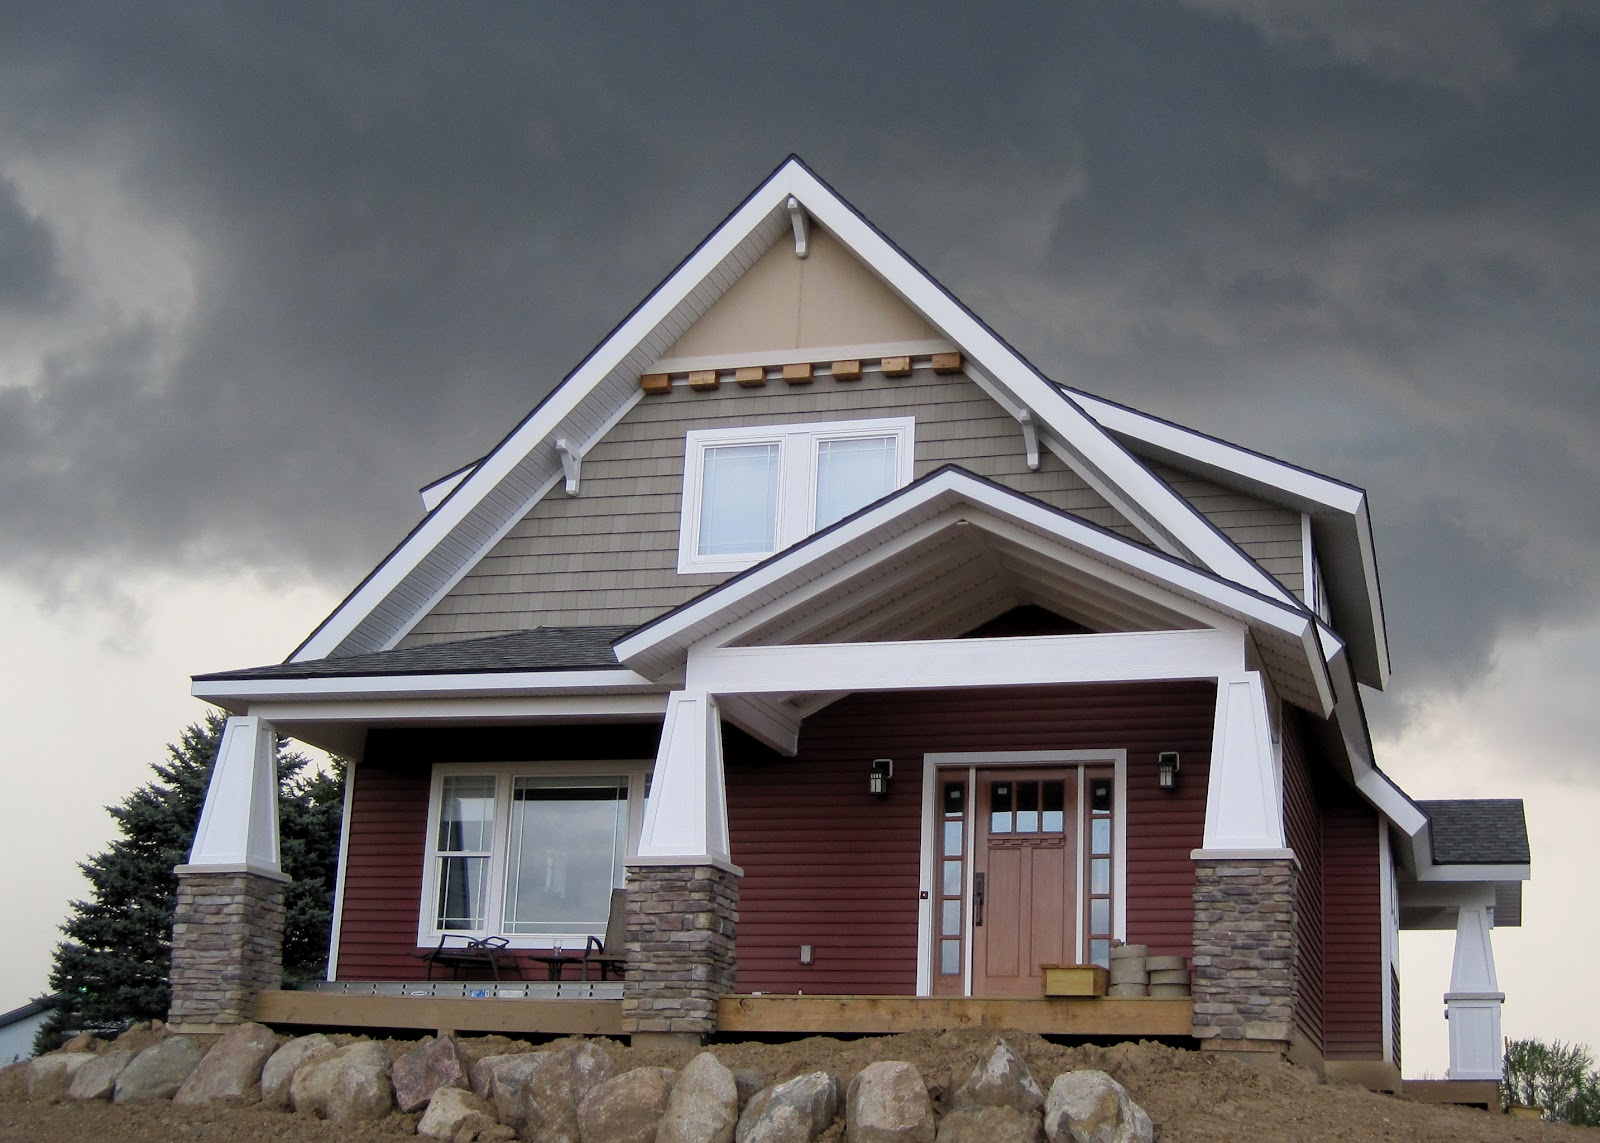 dark+cloudy+skies+over+the+house